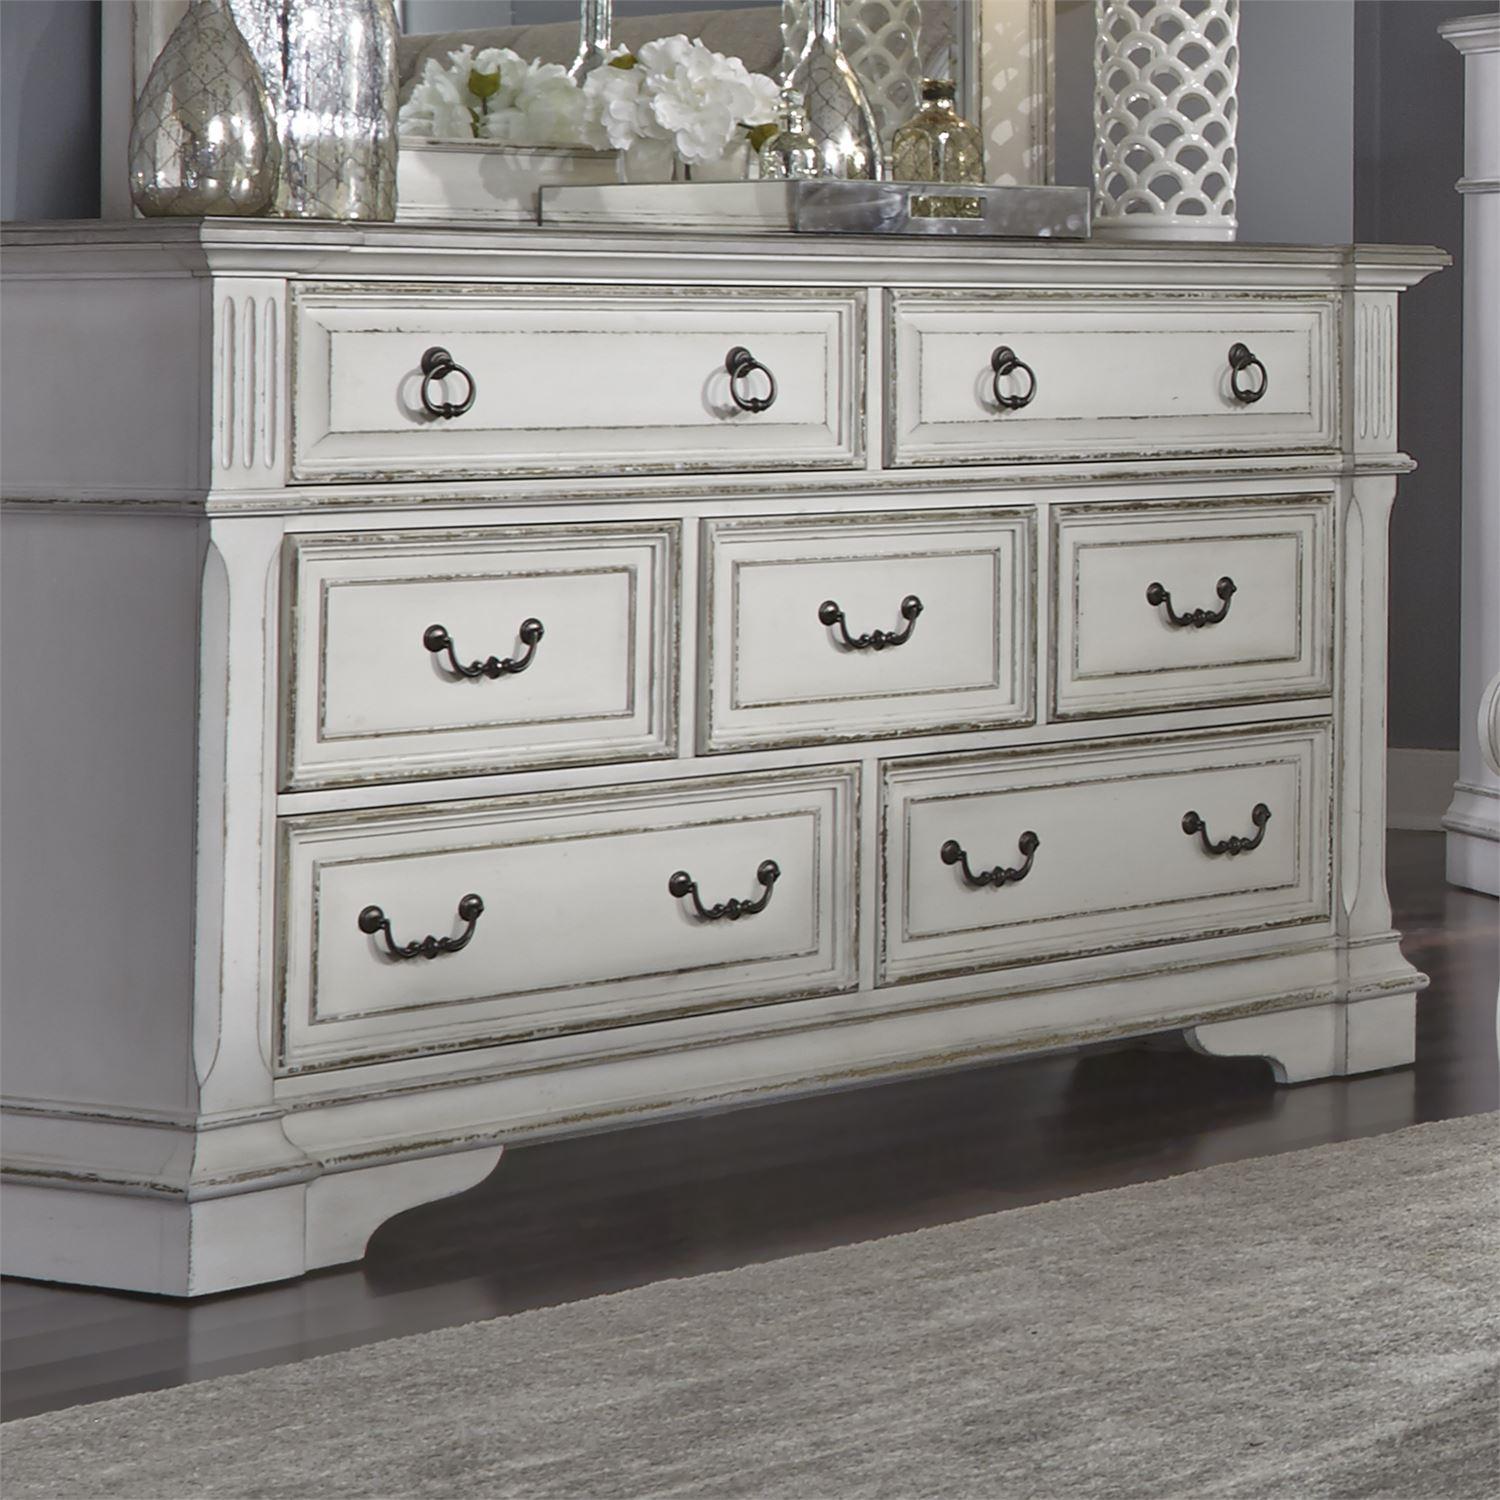 Traditional Combo Dresser Abbey Park 520-BR31 520-BR31 in White 